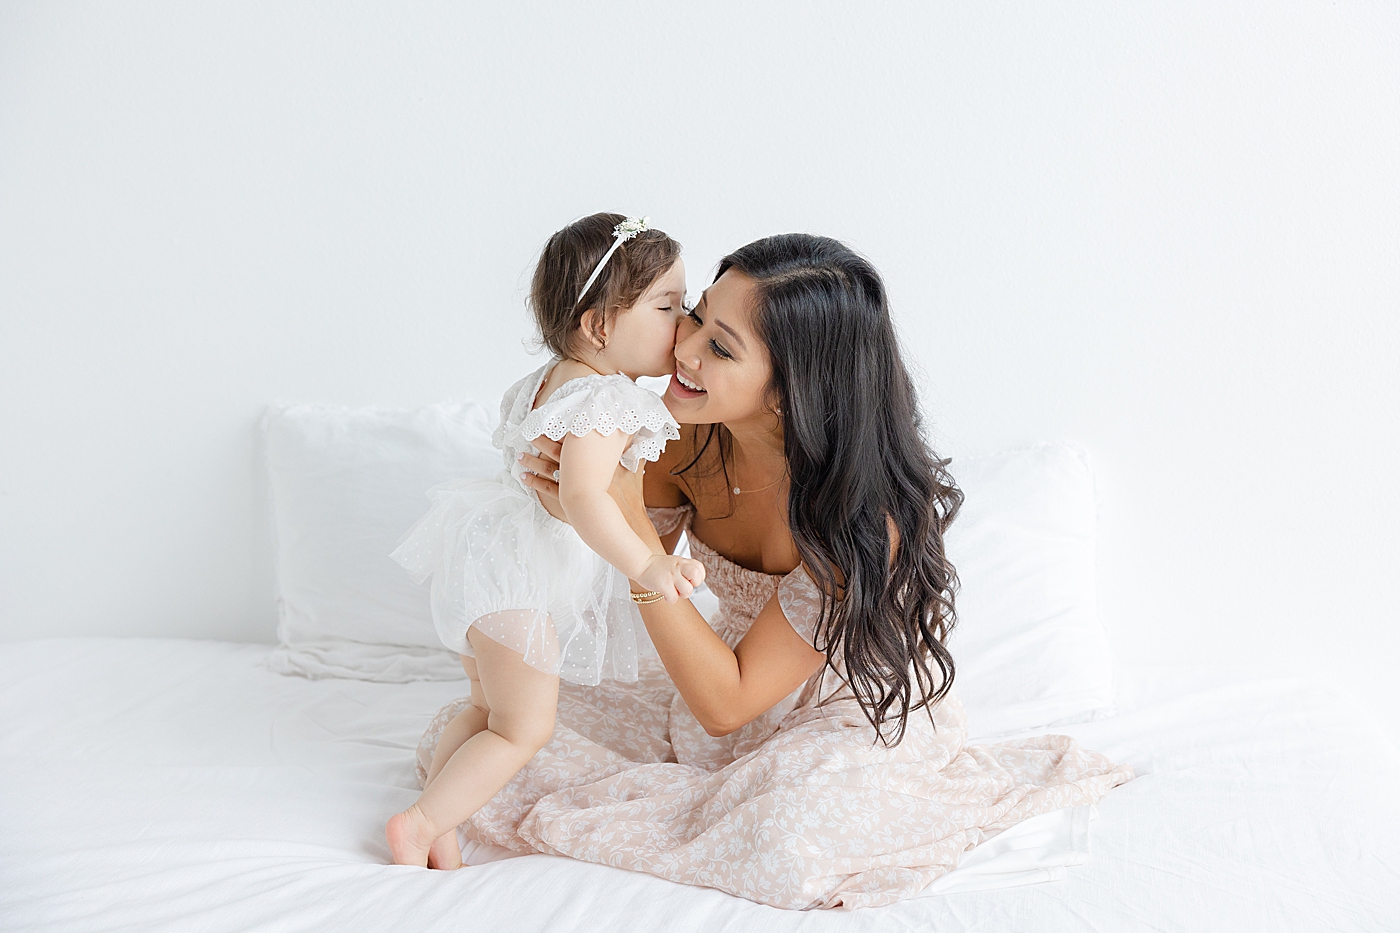 Baby girl giving mom a kiss on the cheek | Image by Sana Ahmed Photography